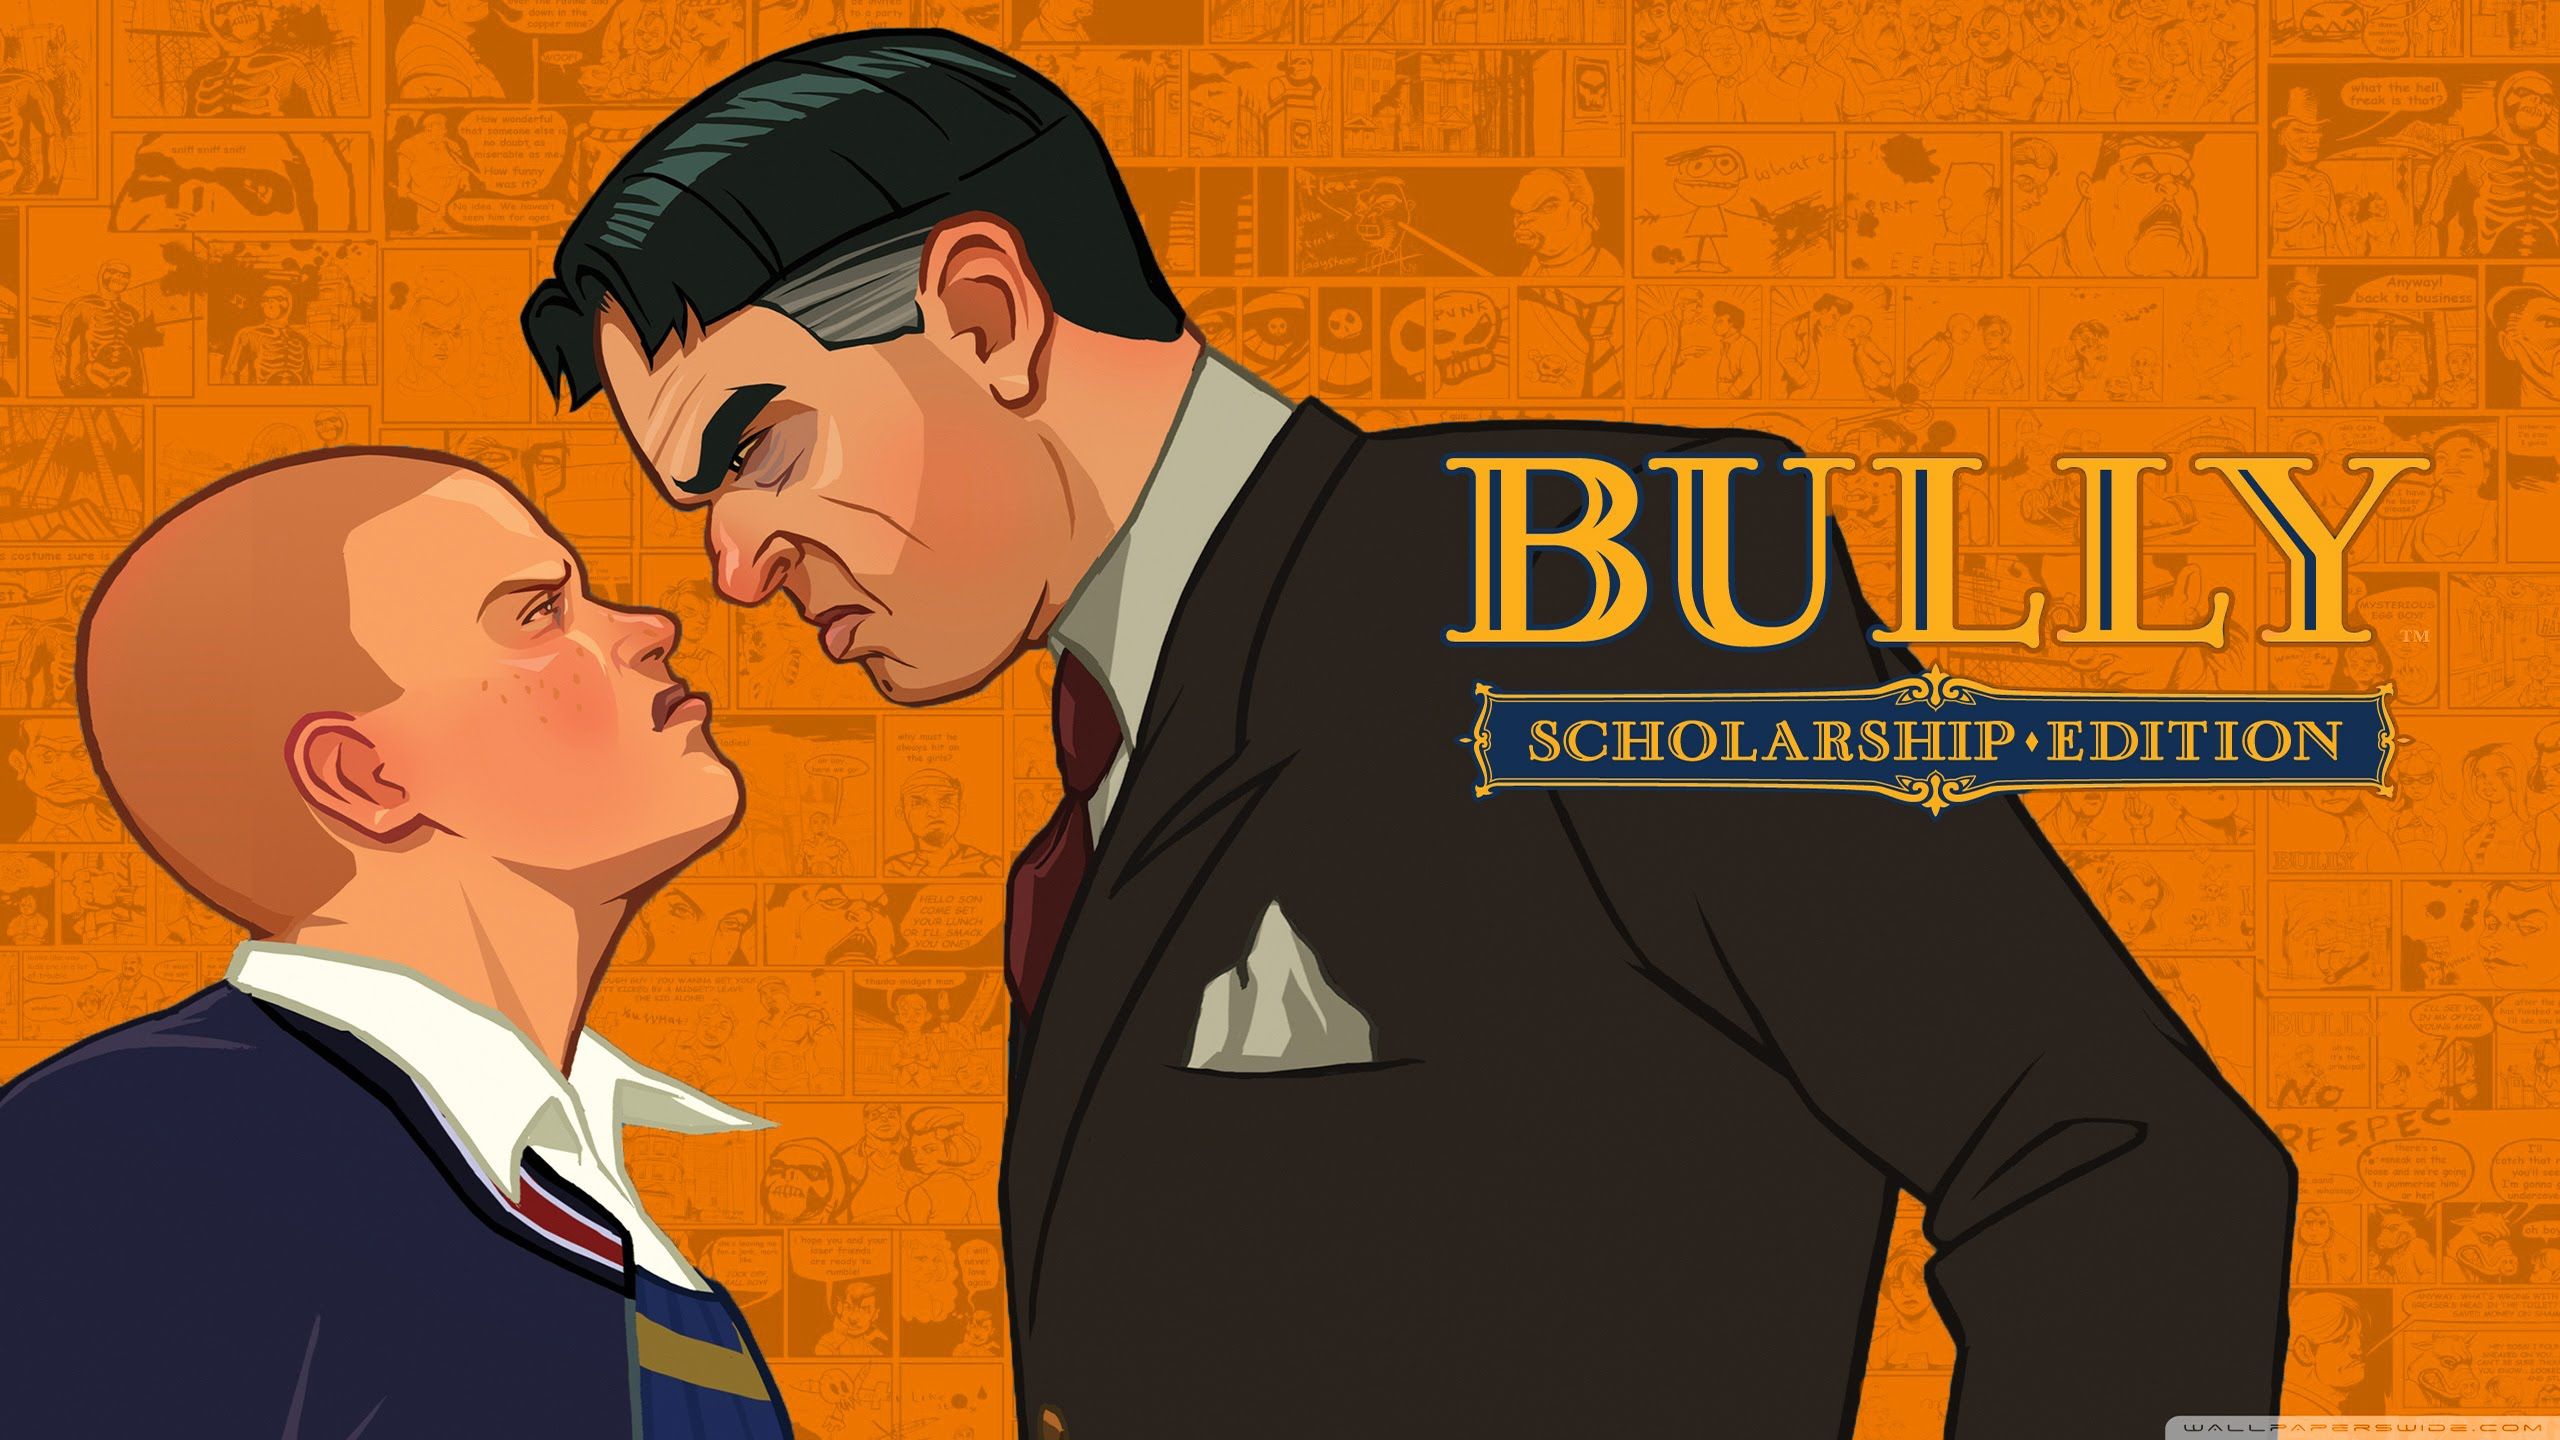 How to Download Bully Anniversary Ios